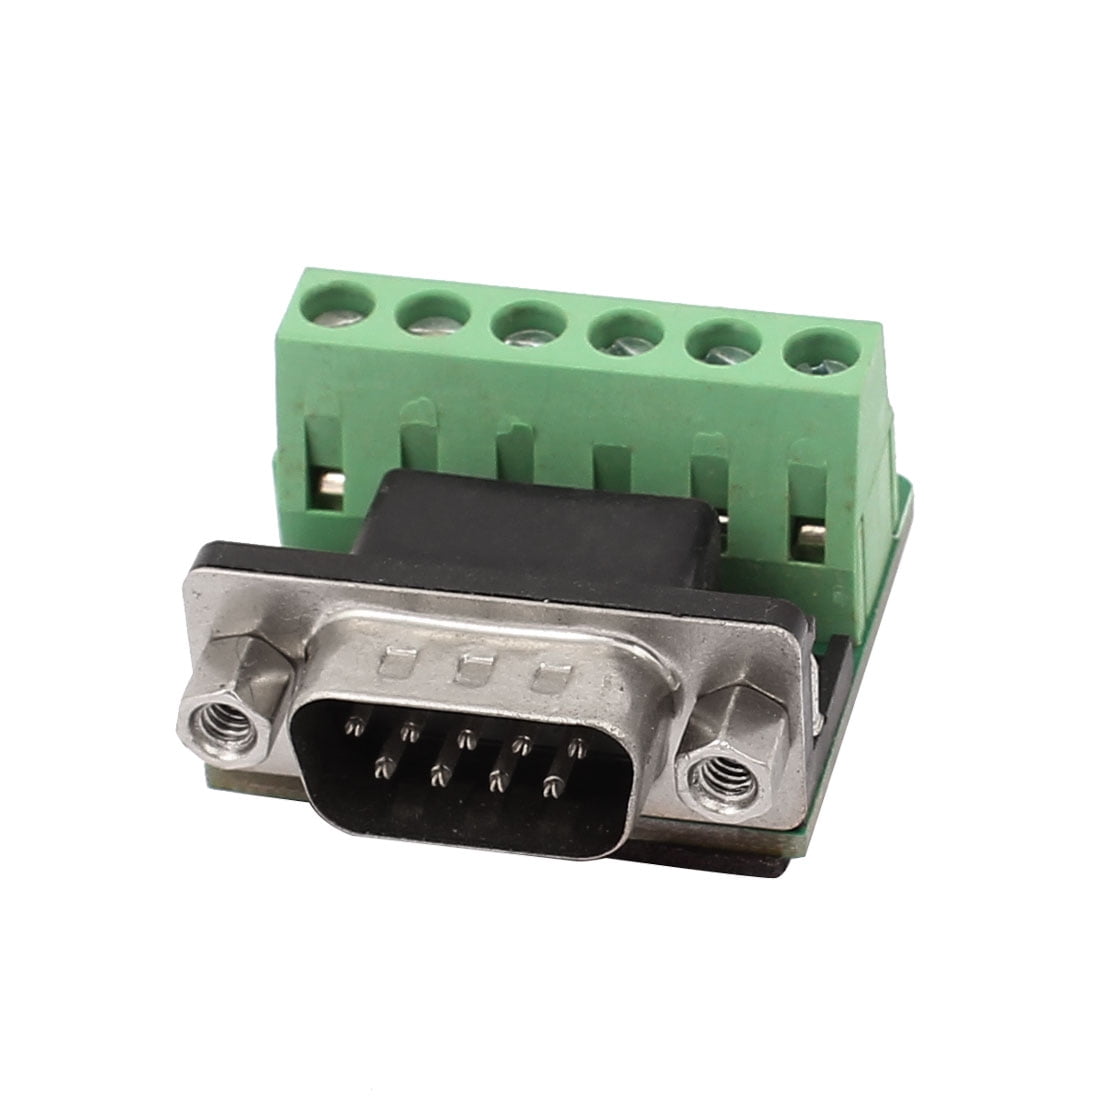 DB9 Male 9Pin D-Sub Connector solderless Terminal Board Plastic Cover screw WC 